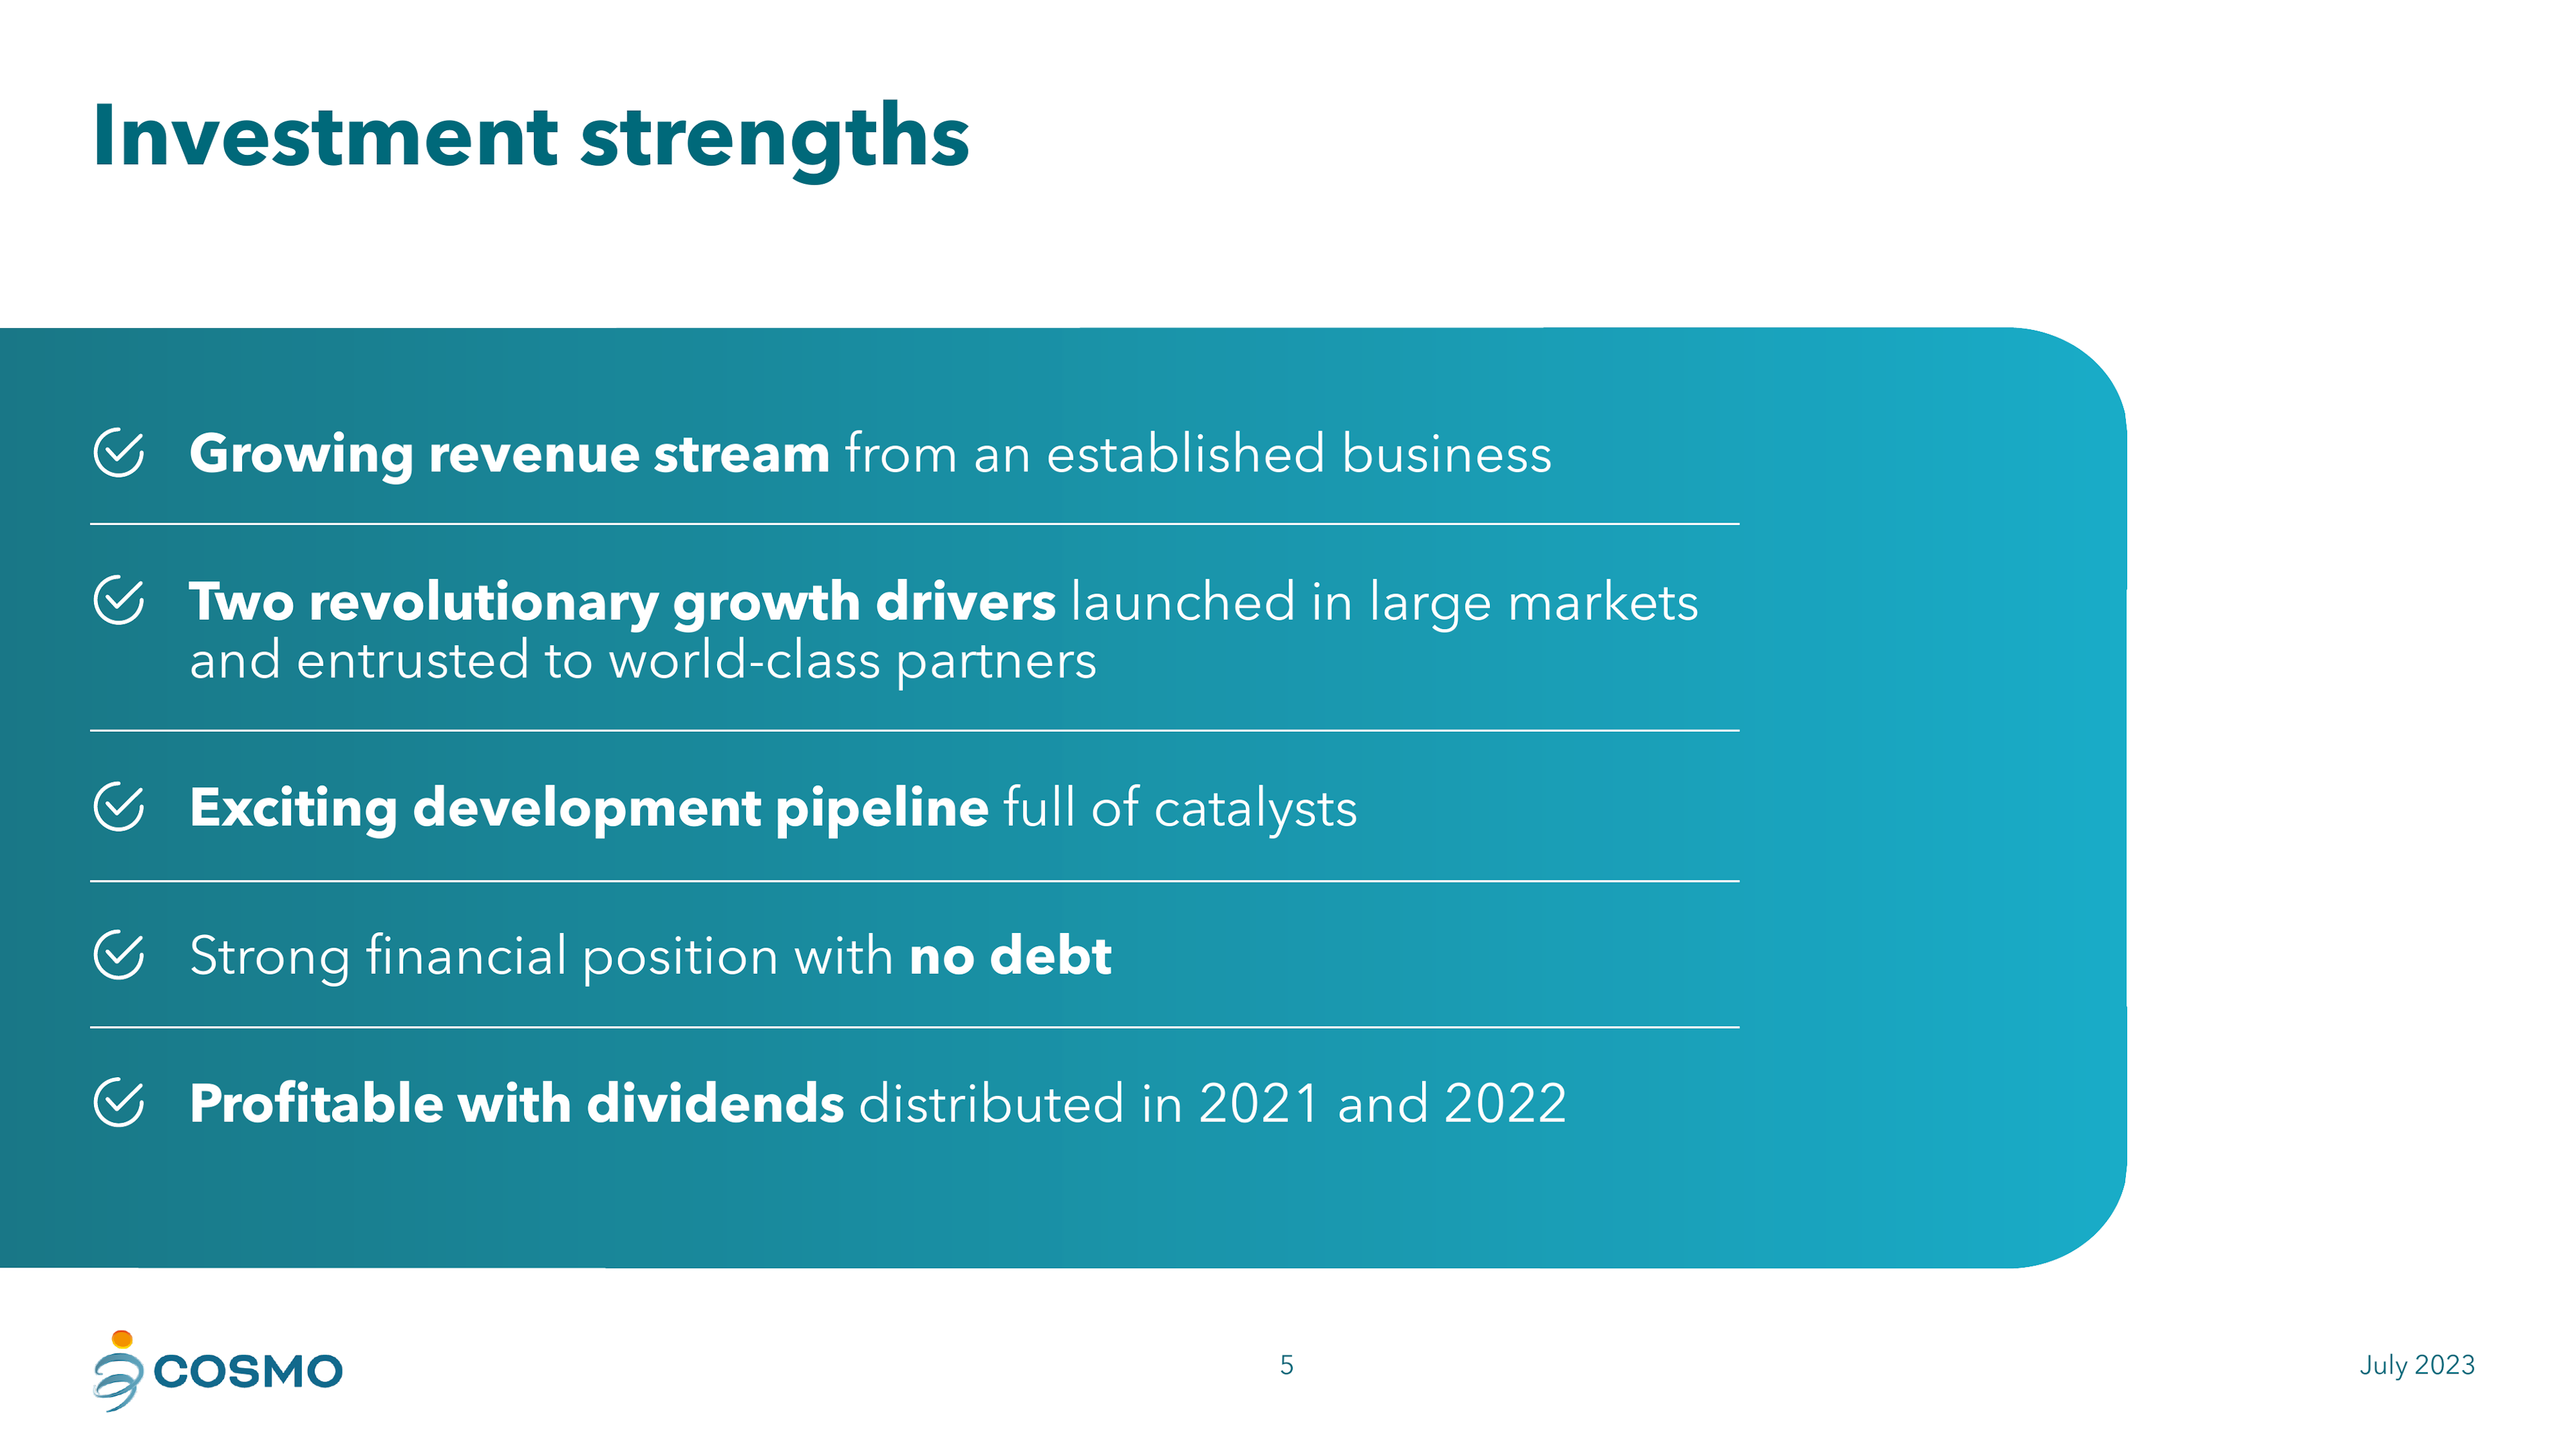 Investment strengths